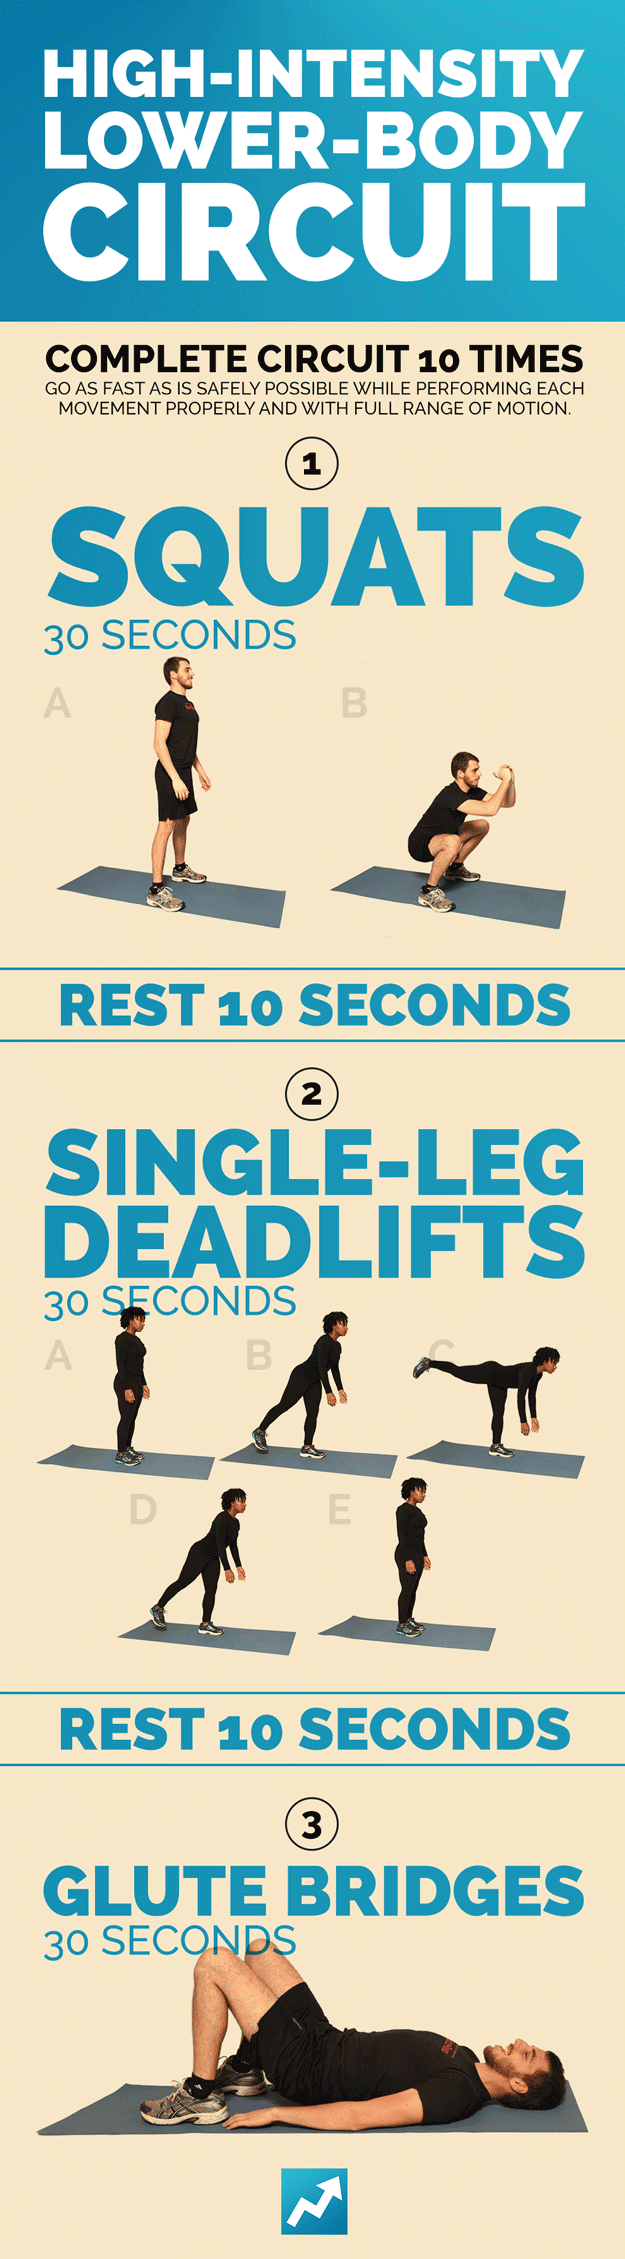 HIGH Low - Full Workout, 30 Minutes